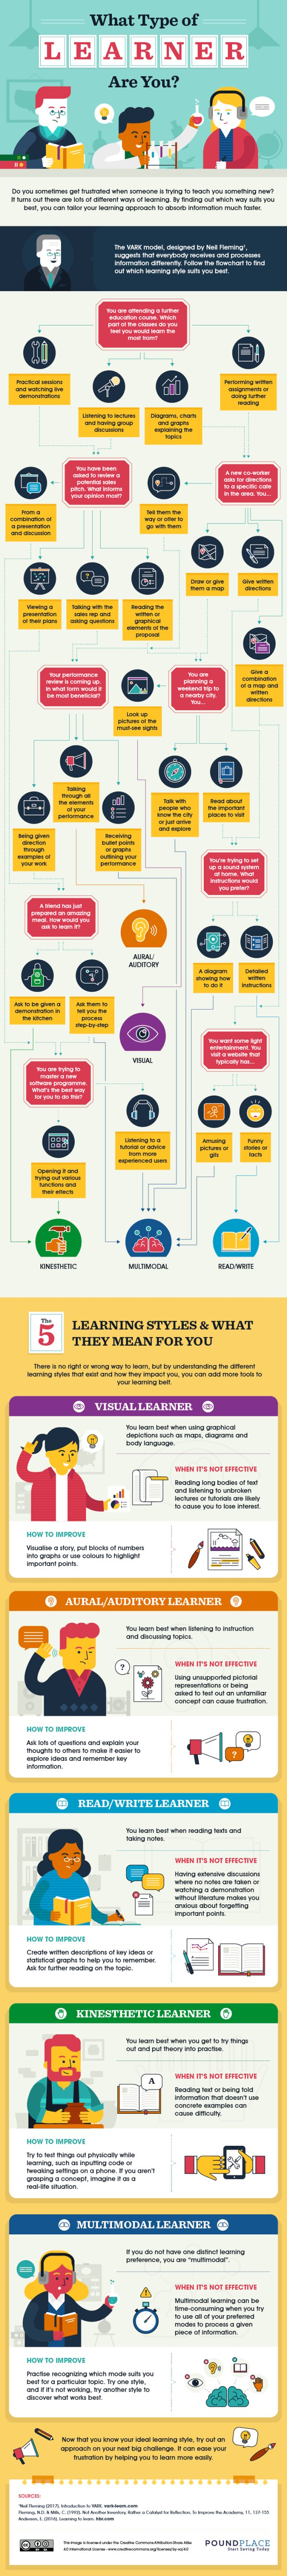 Types-of-Learners-Infographic